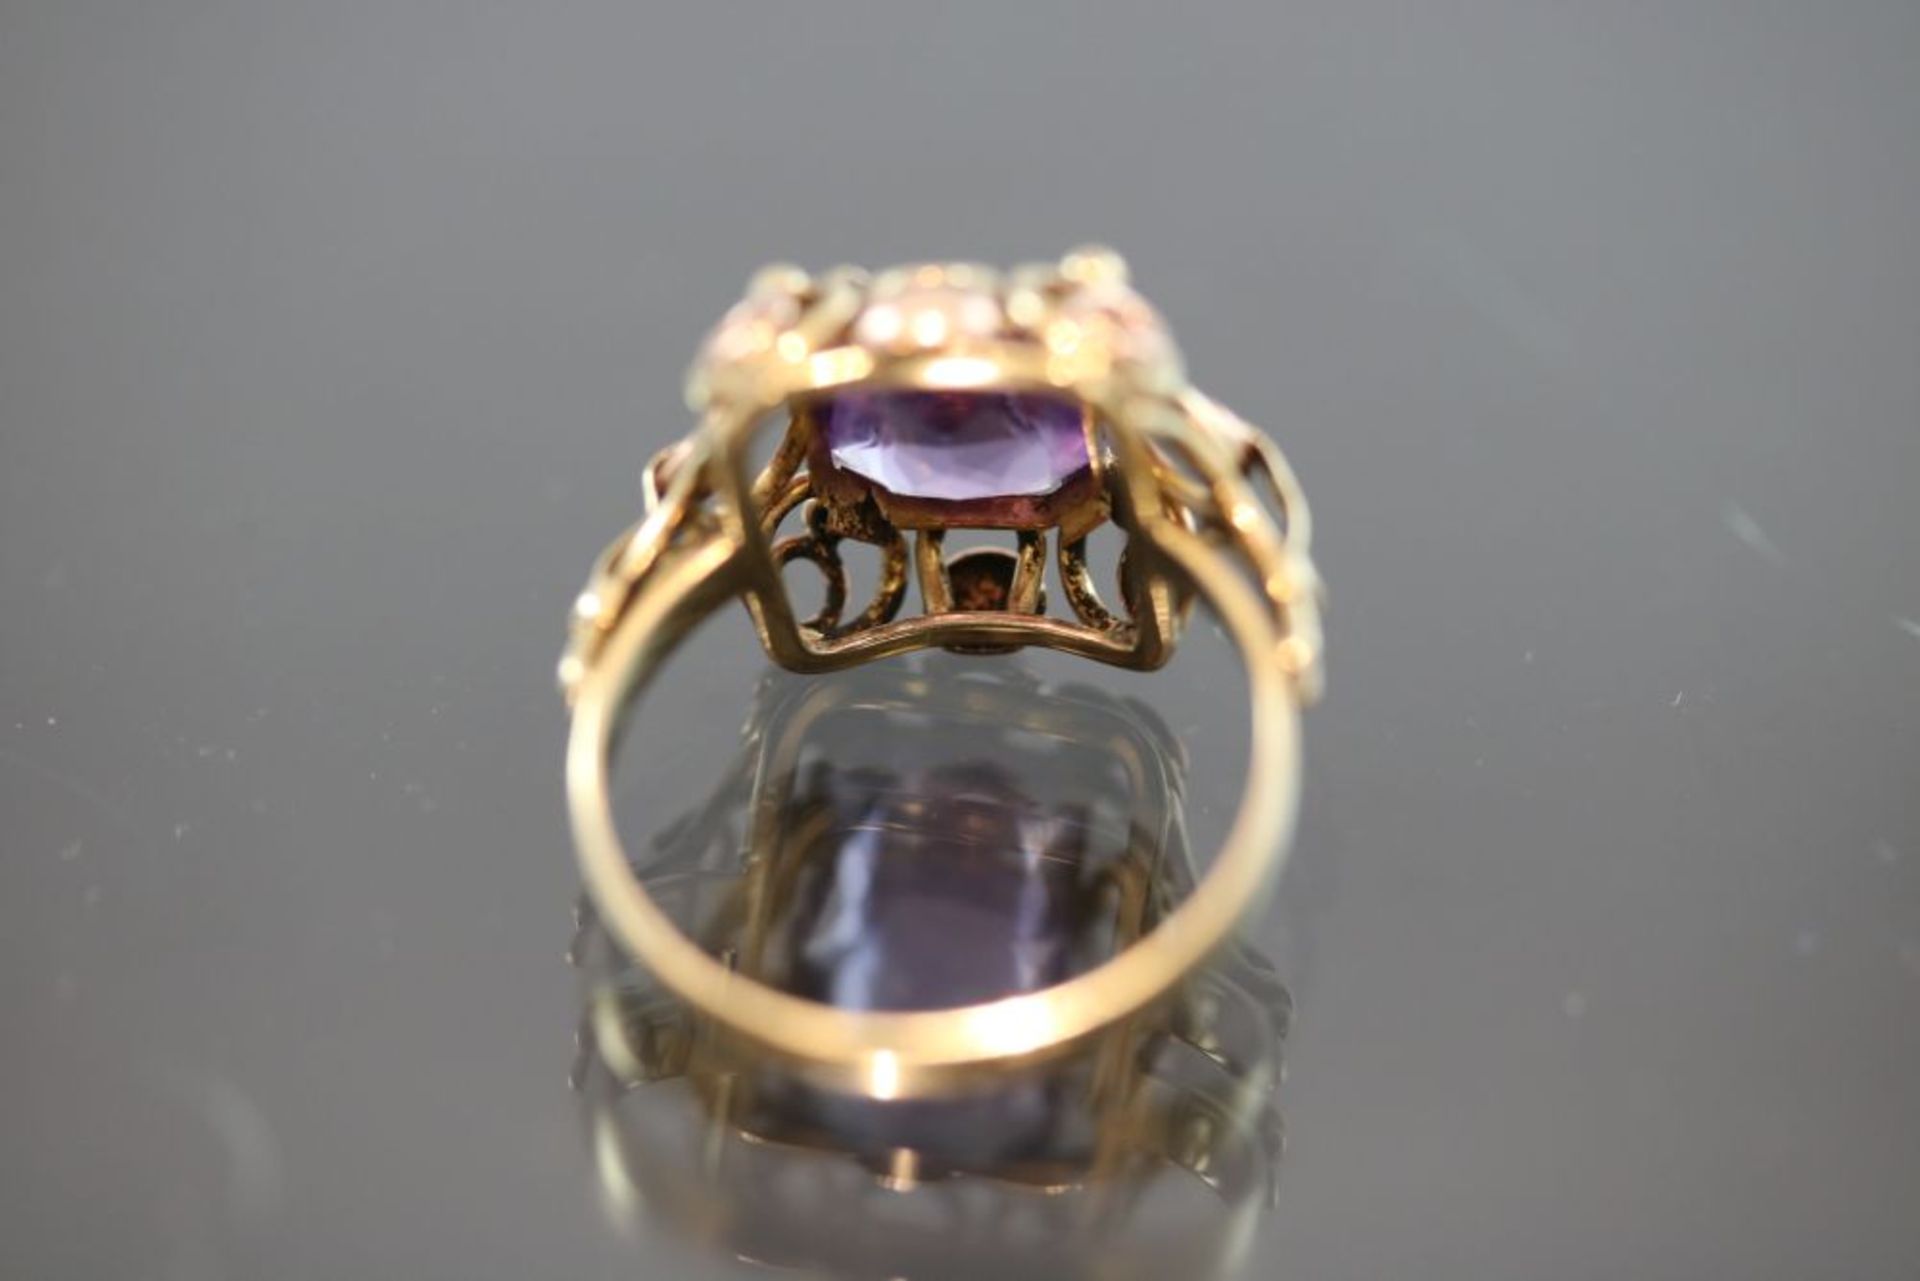 Amethyst-Ring, 585 Gold - Image 3 of 3